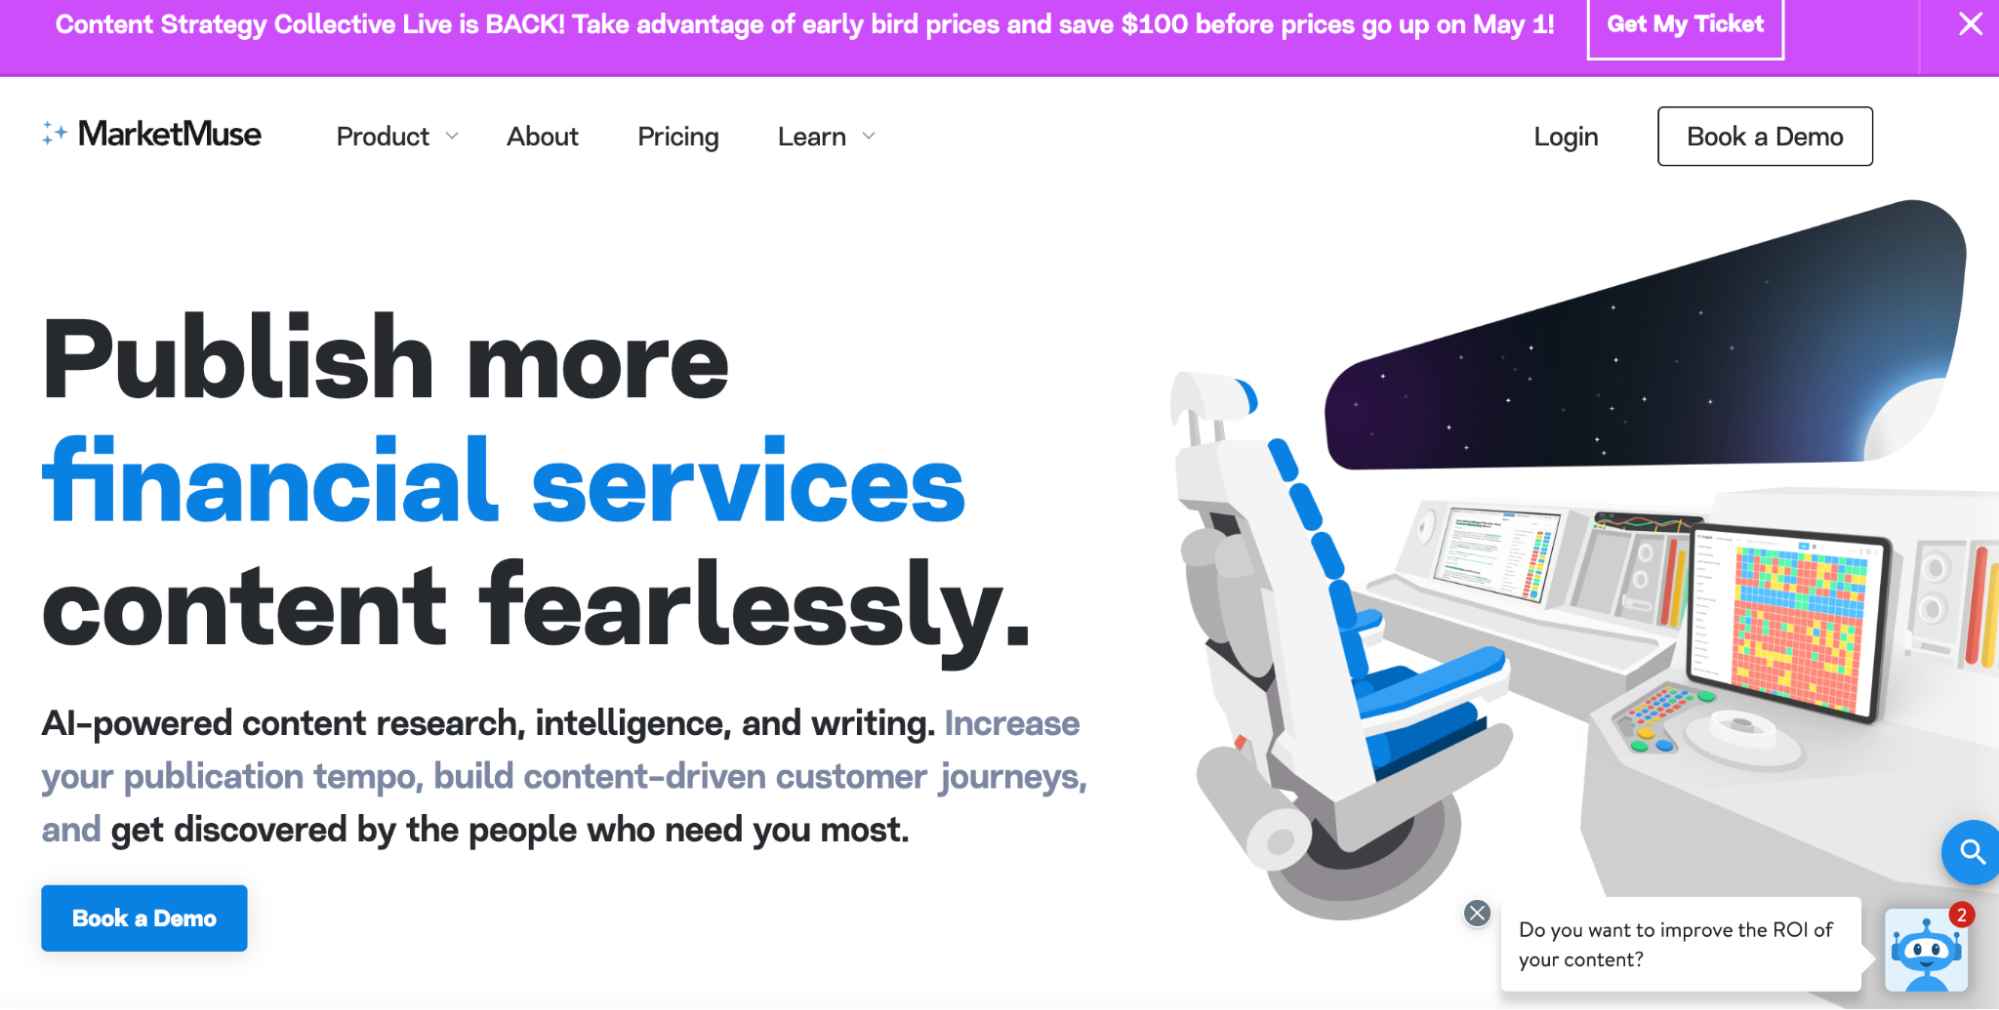 The homepage for MarketMuse